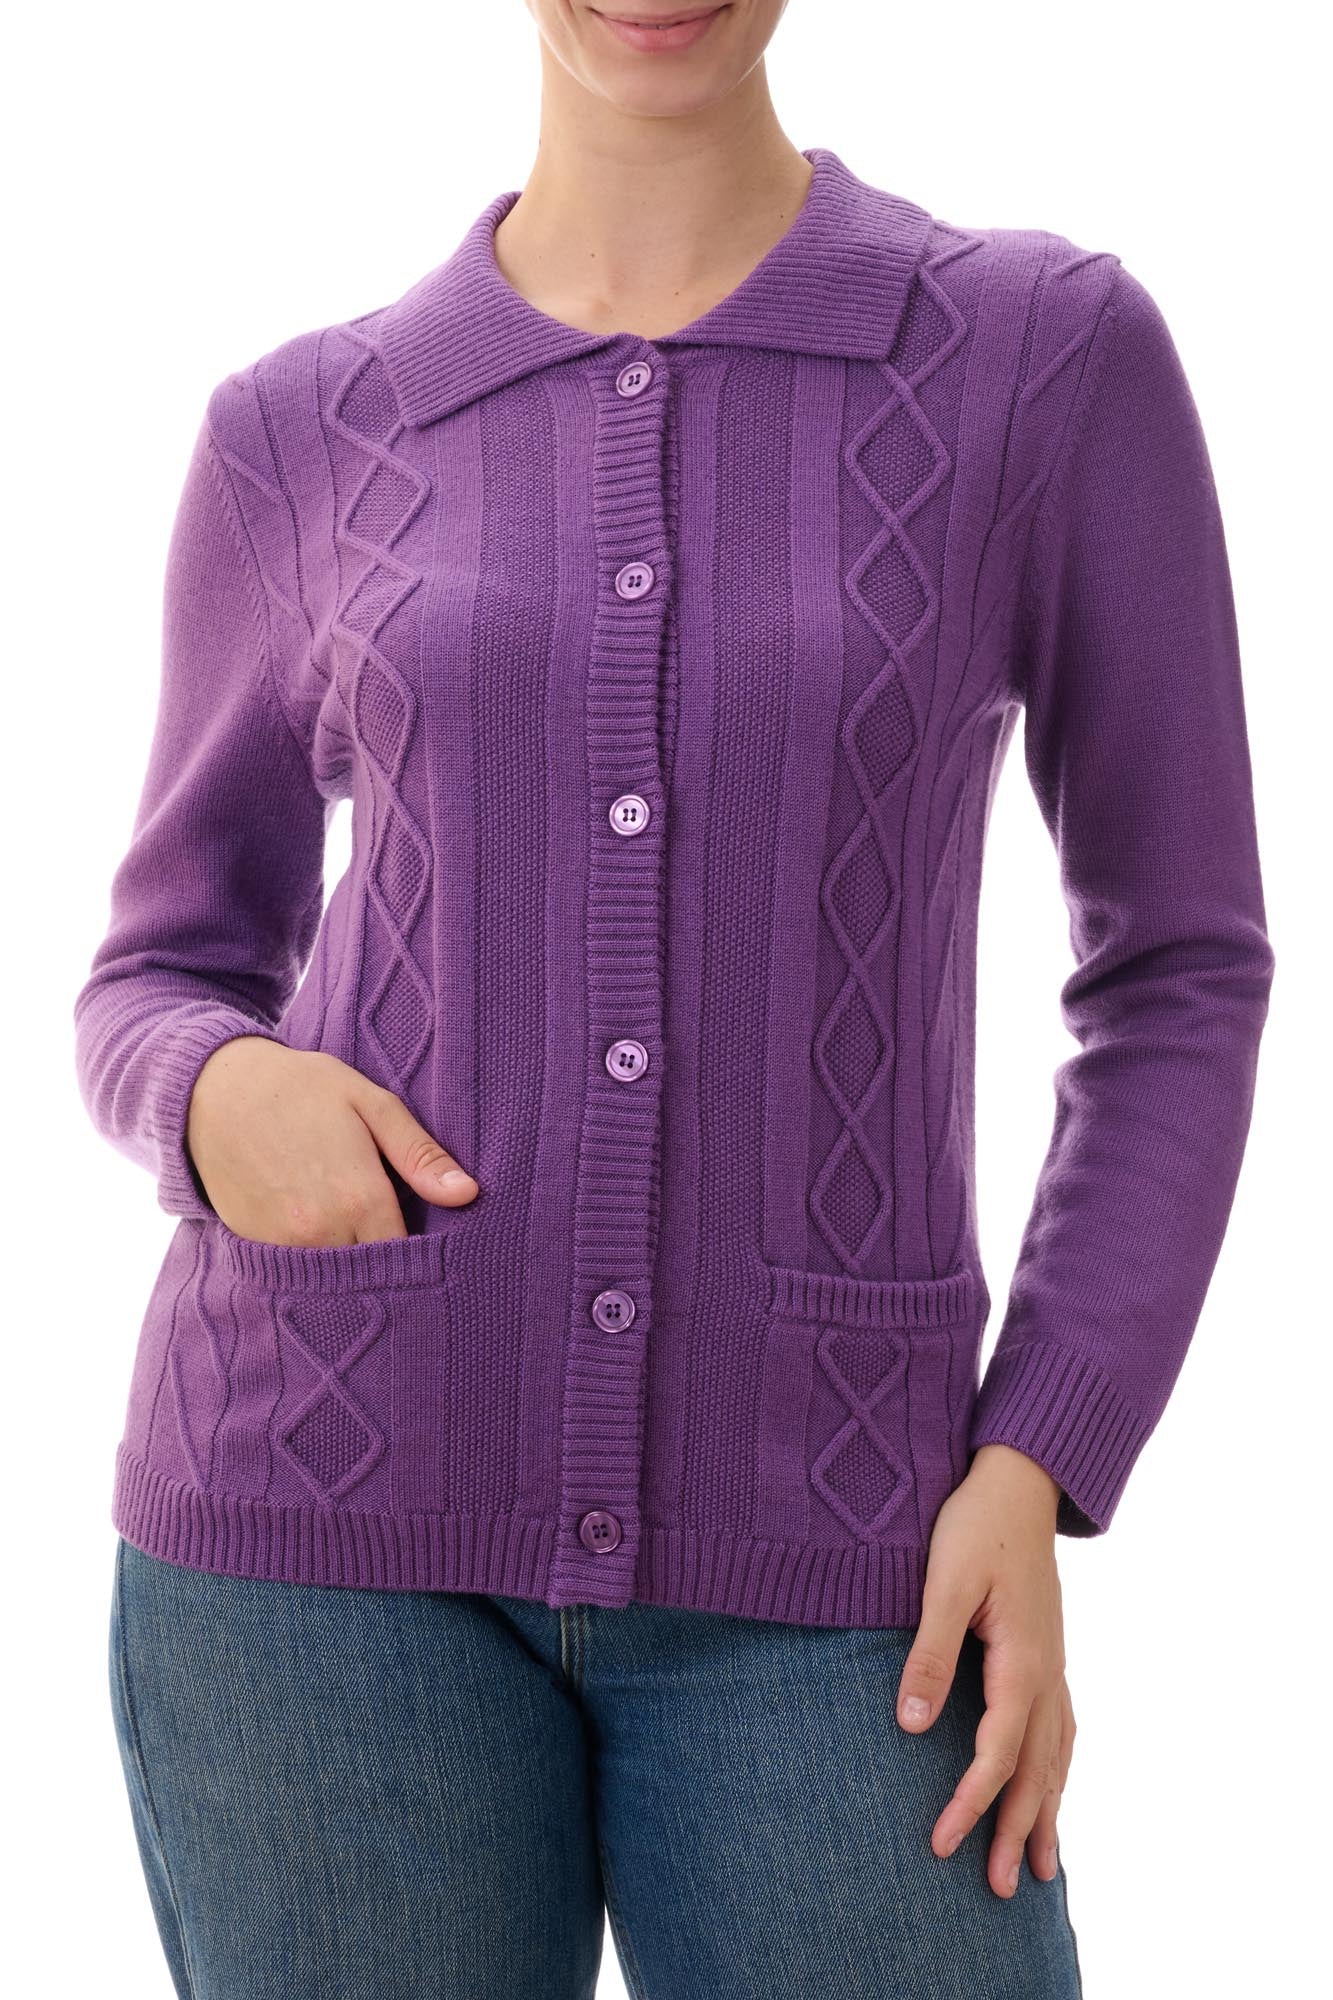 3WL510 - Collared cable front cardi